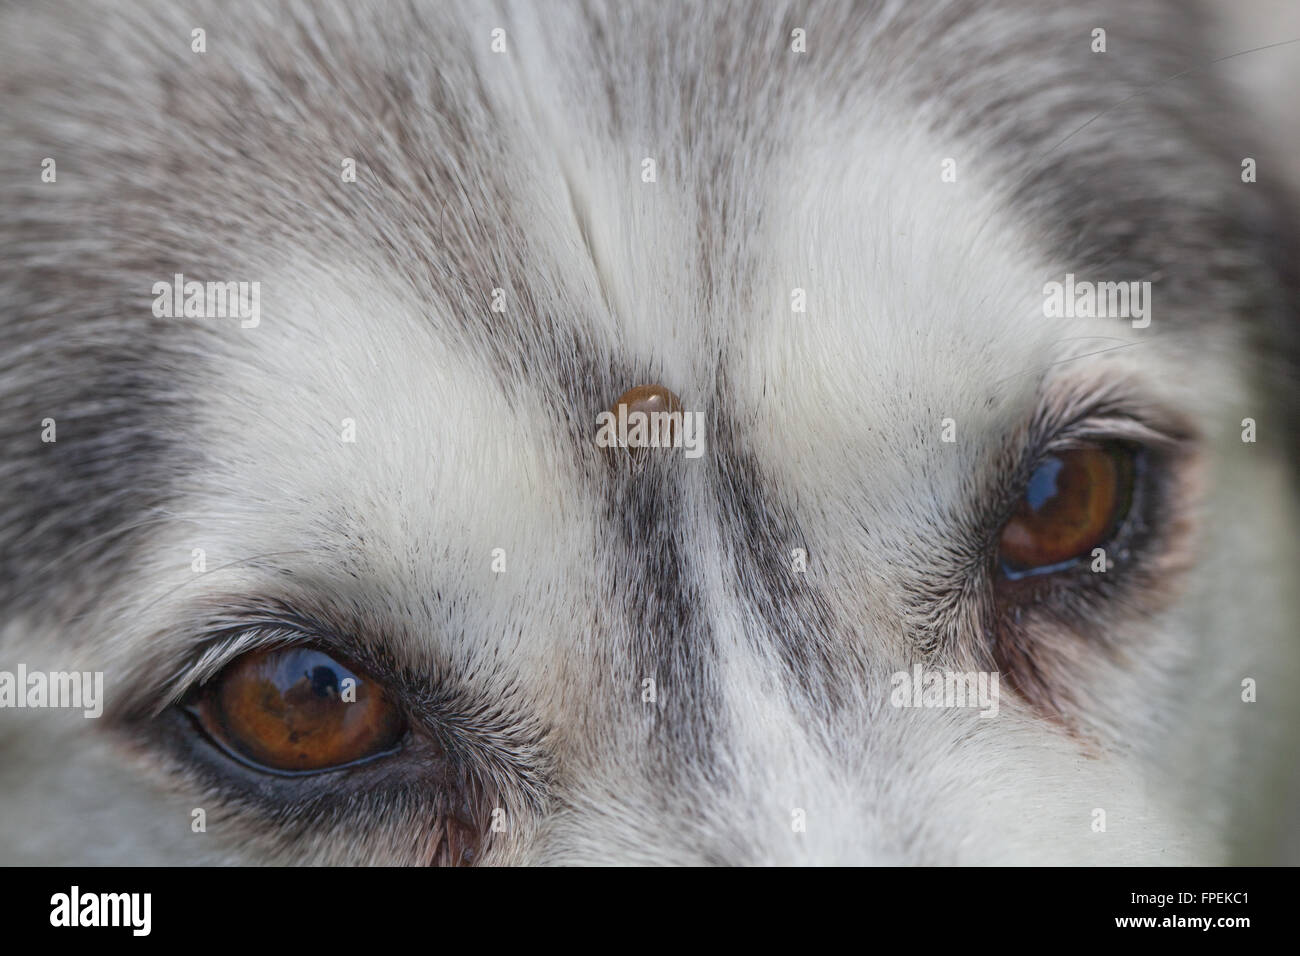 Siberian Husky. Dog. Canis lupus familiaris. Forehead. Note tick, Ixodes ricinus, embedded on forehead above between eyes. Stock Photo